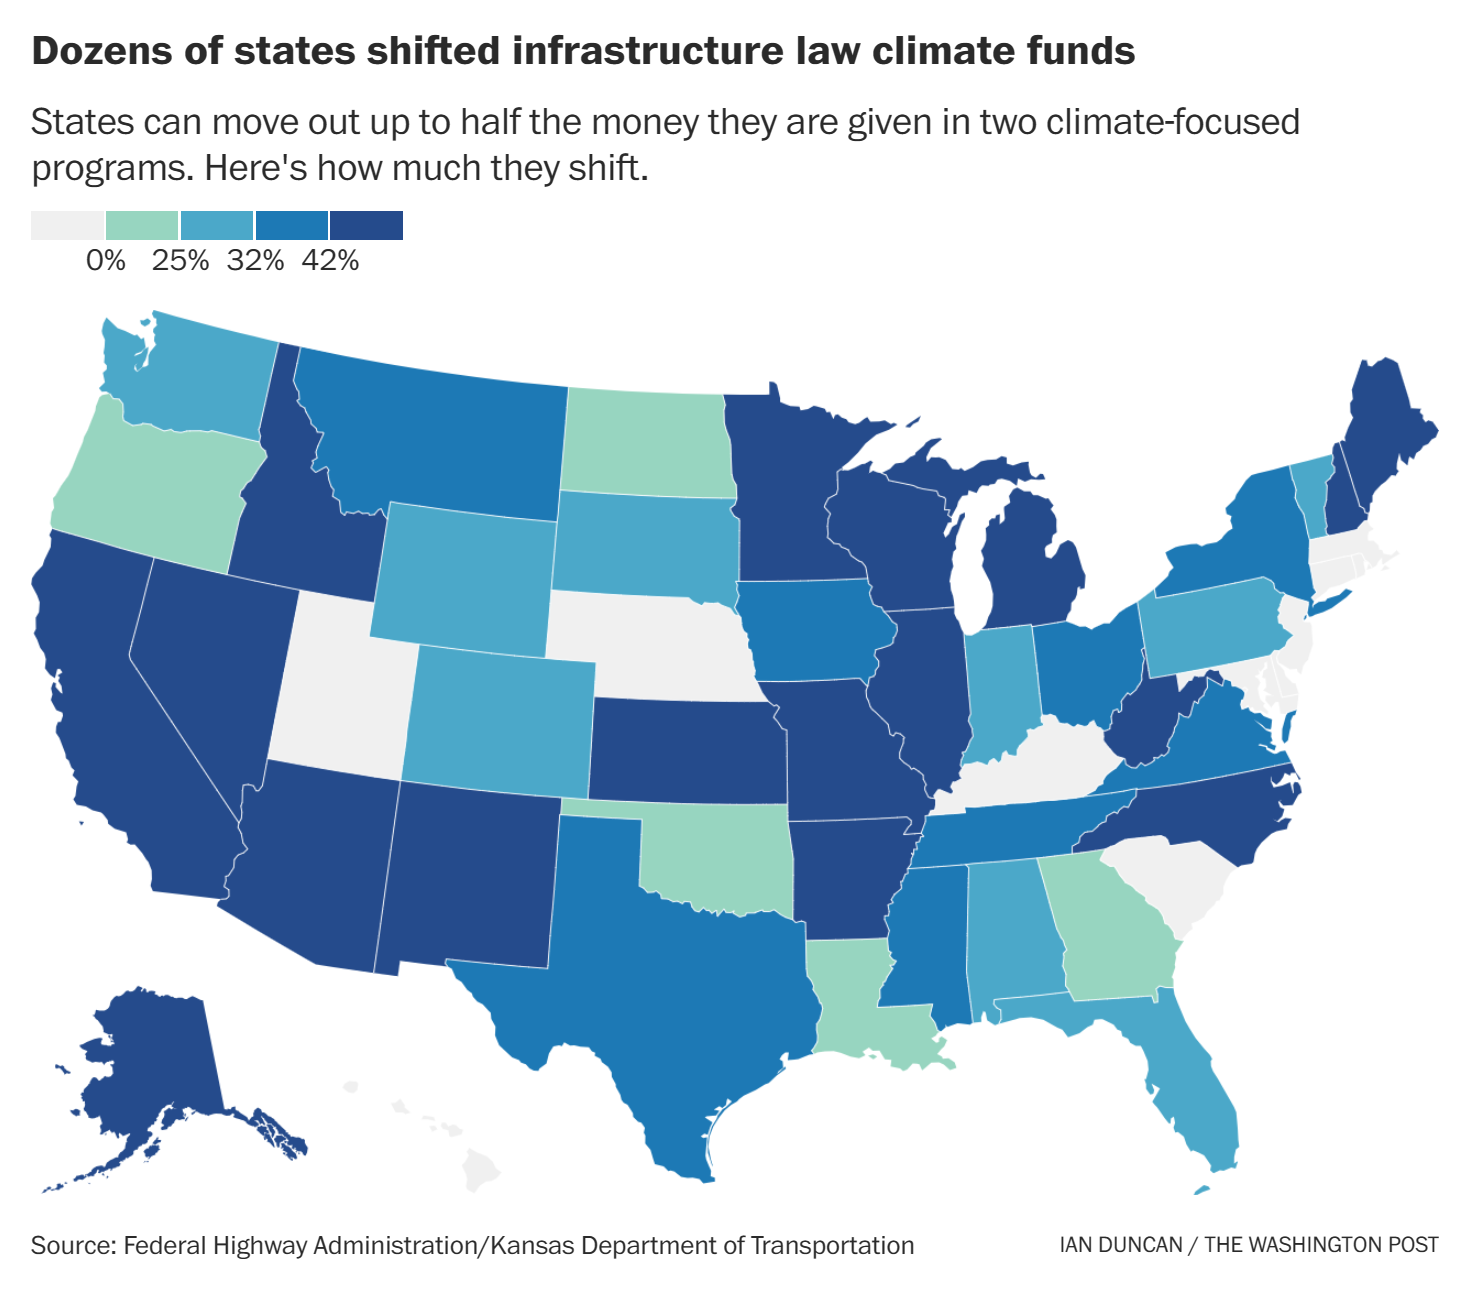 Map showing how dozens of U.S. states shifted infrastructure law climate funds to other projects. Data: Federal Highway Administration/Kansas Department of Transportation. Graphic: Ian Duncan / The Washington Post